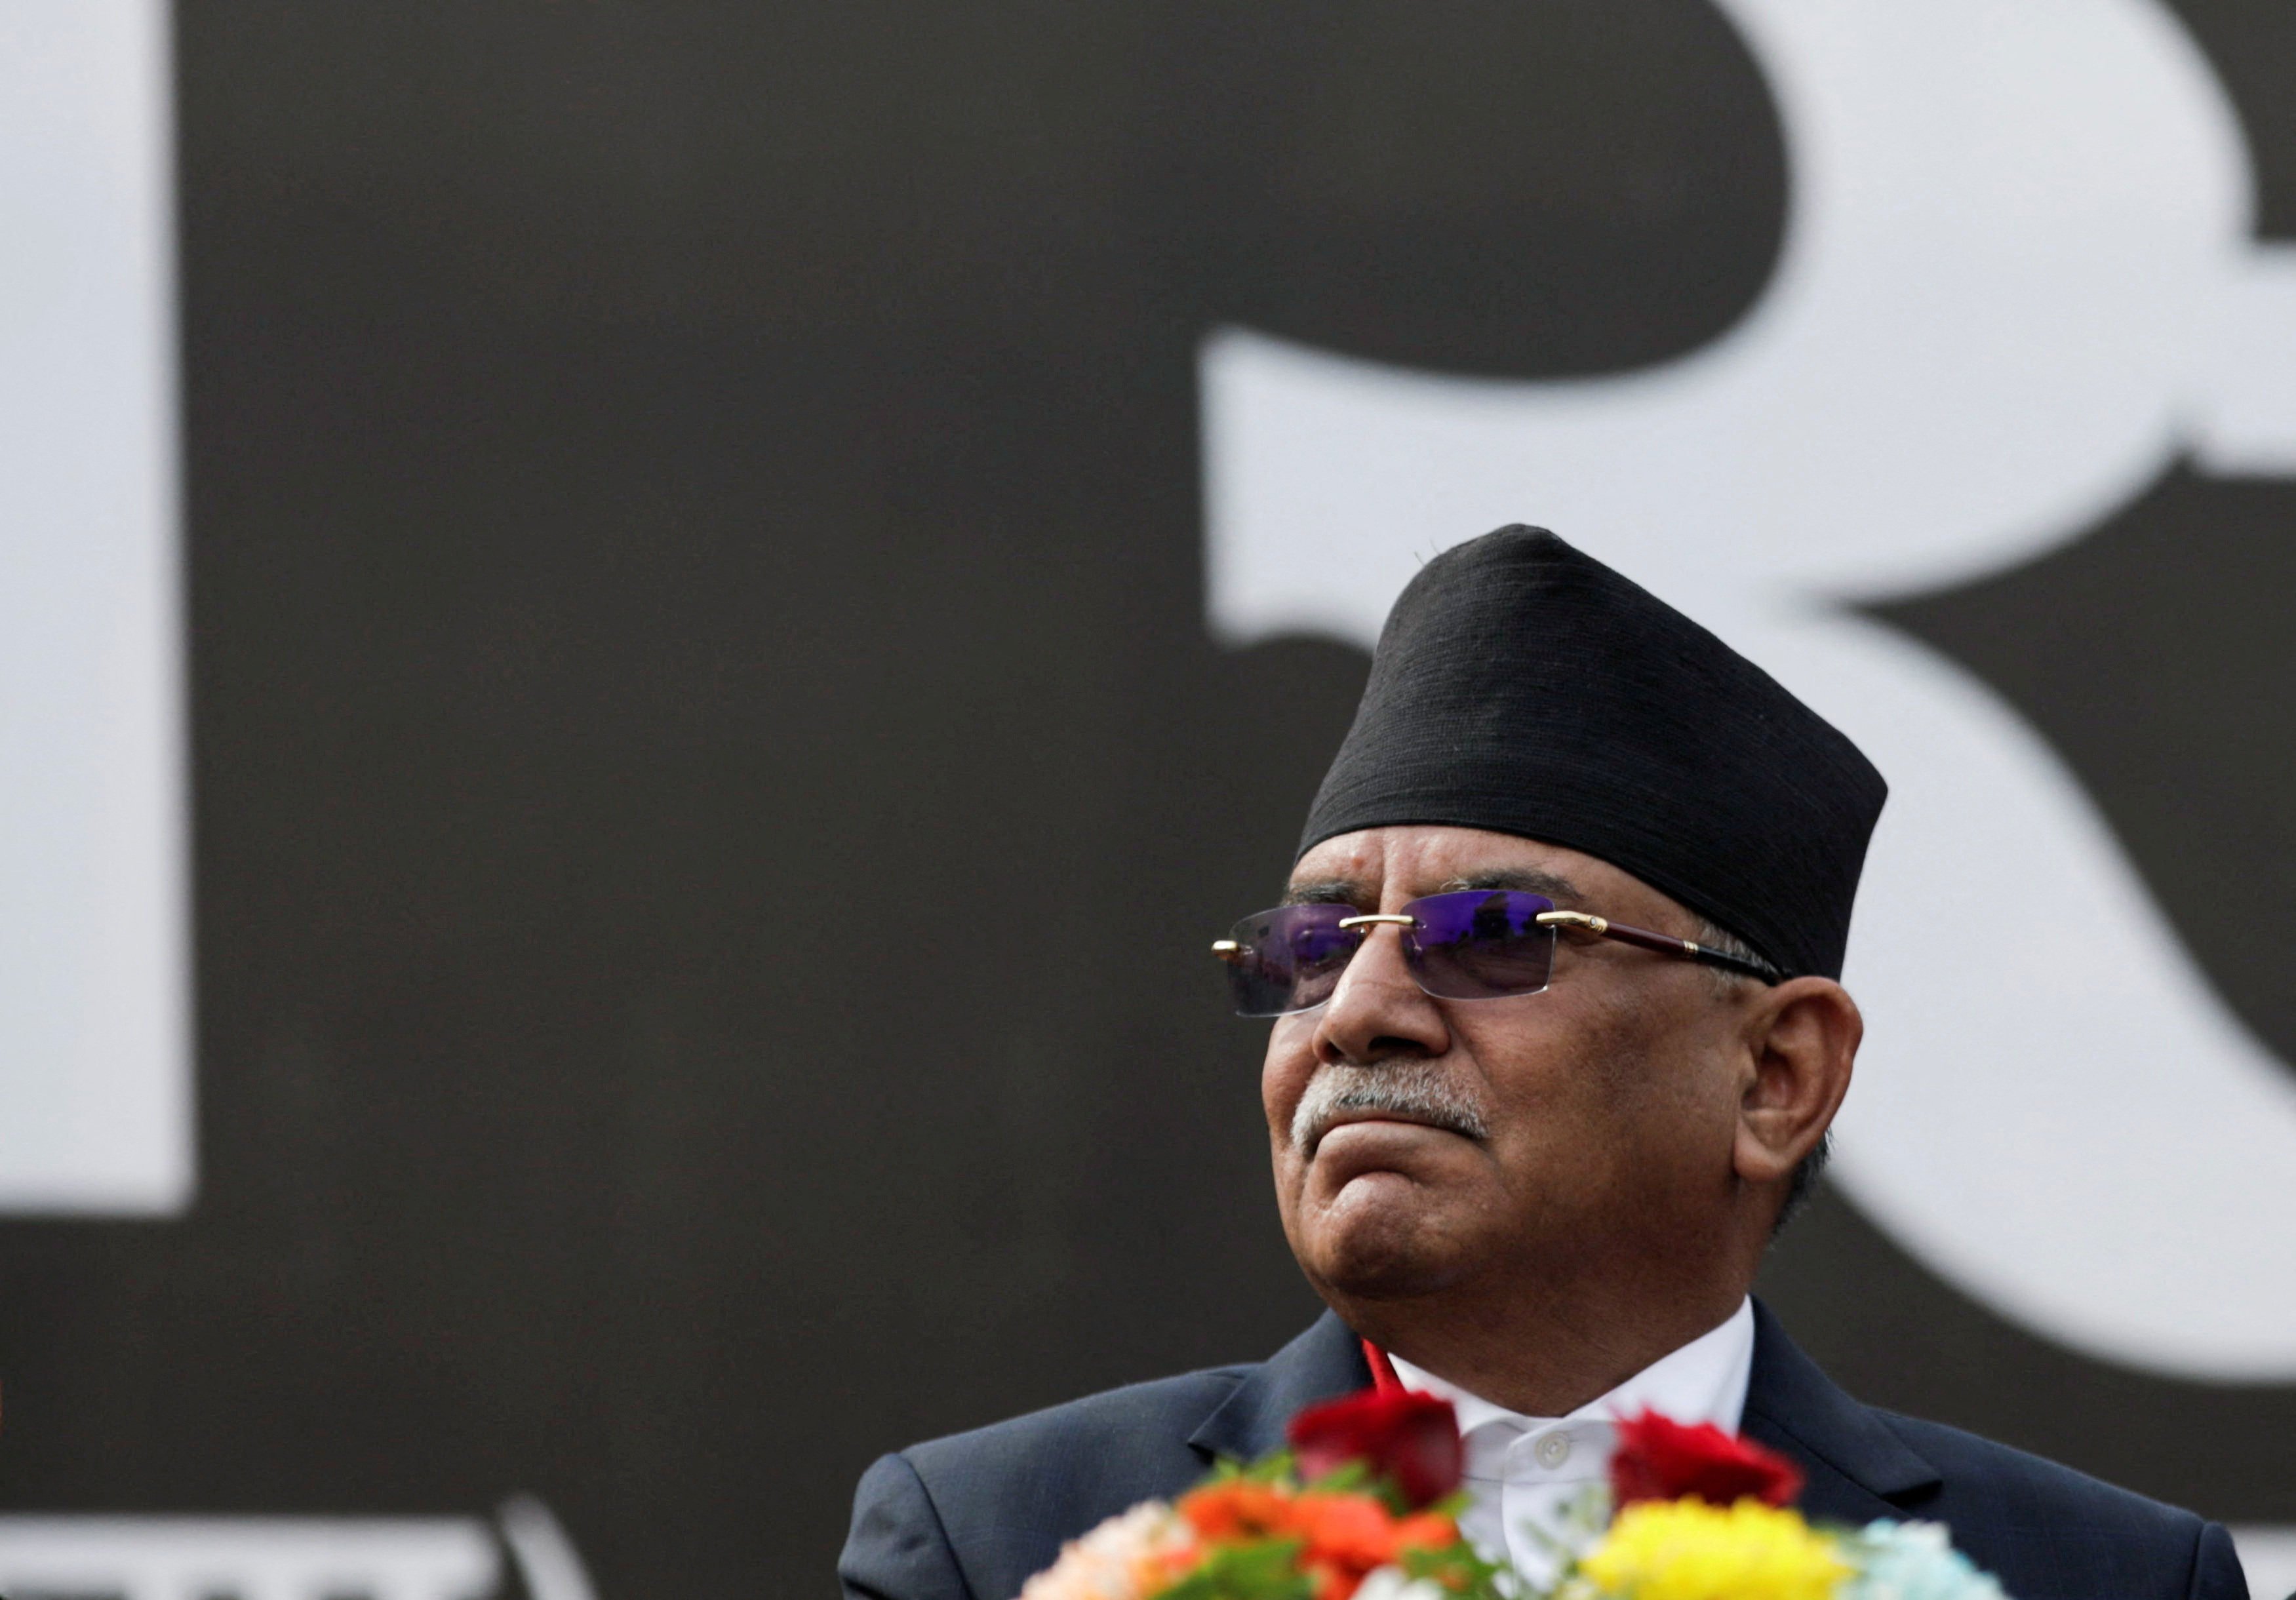 Nepal’s new Prime Minister Pushpa Kamal Dahal, also known as Prachanda. Photo: Reuters